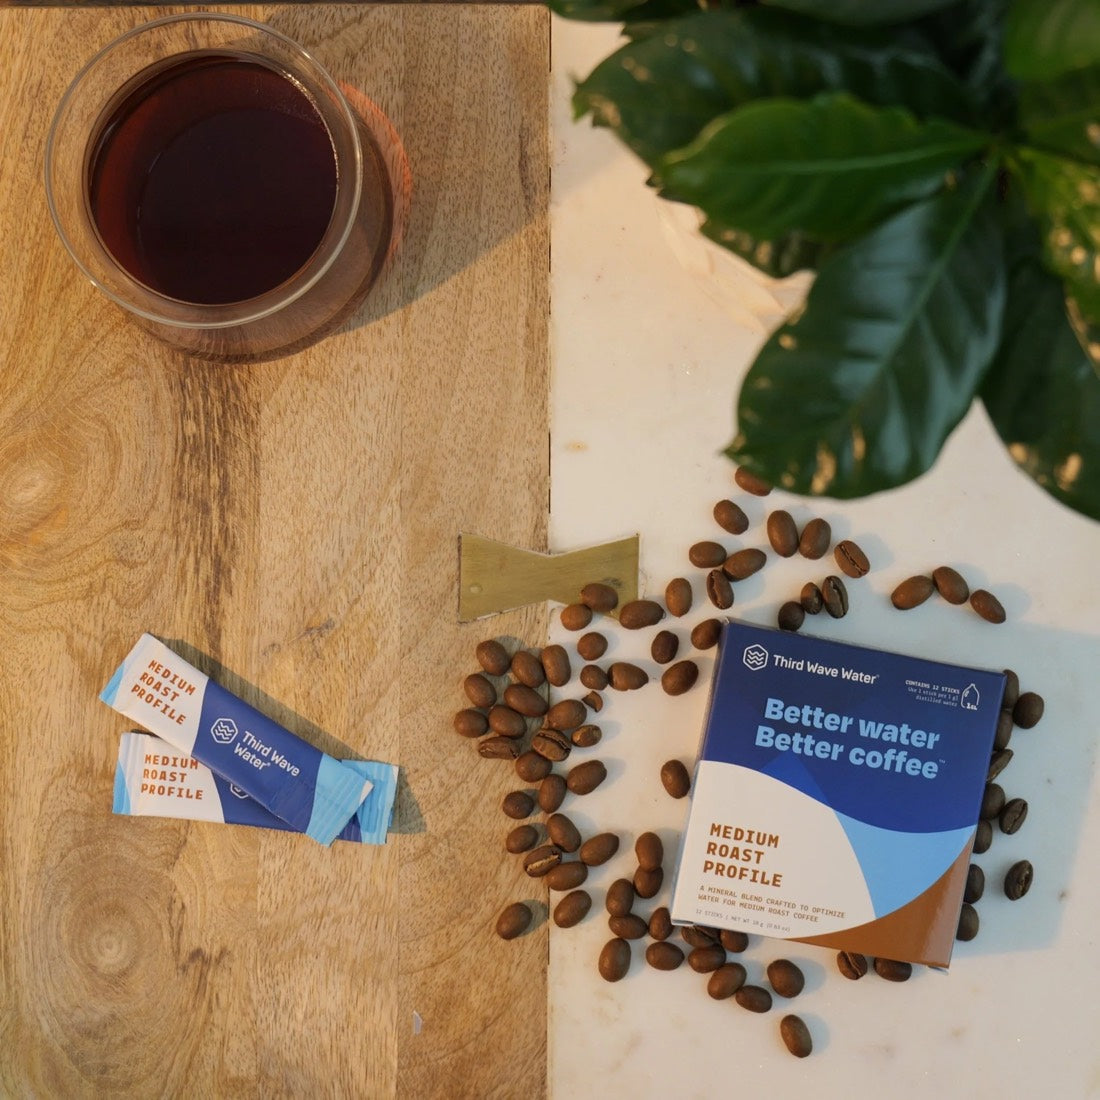 Third Wave Water - Medium Roast Profile - Mineral Packets - Image 2